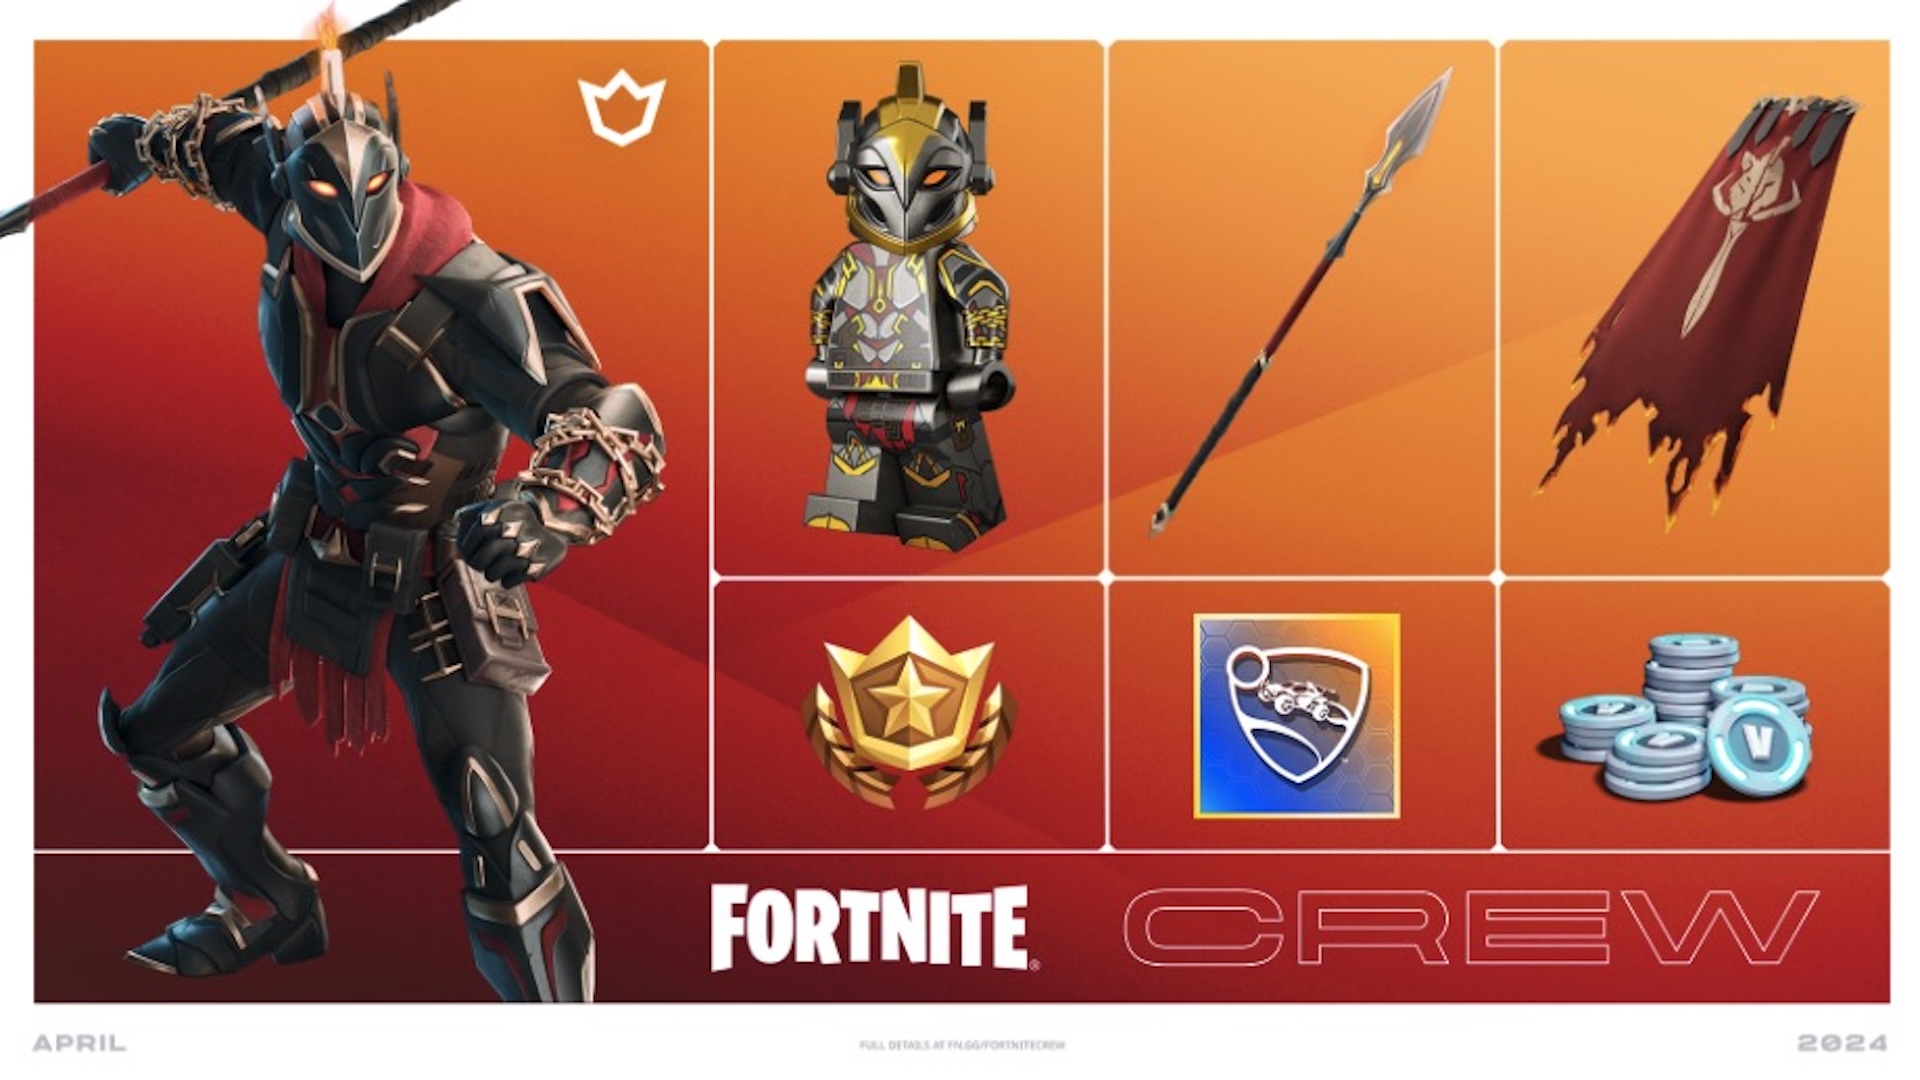 The Fortnite Crew offering for April 2024. Shows Ares in both regular and Lego Styles, alongside some other rewards